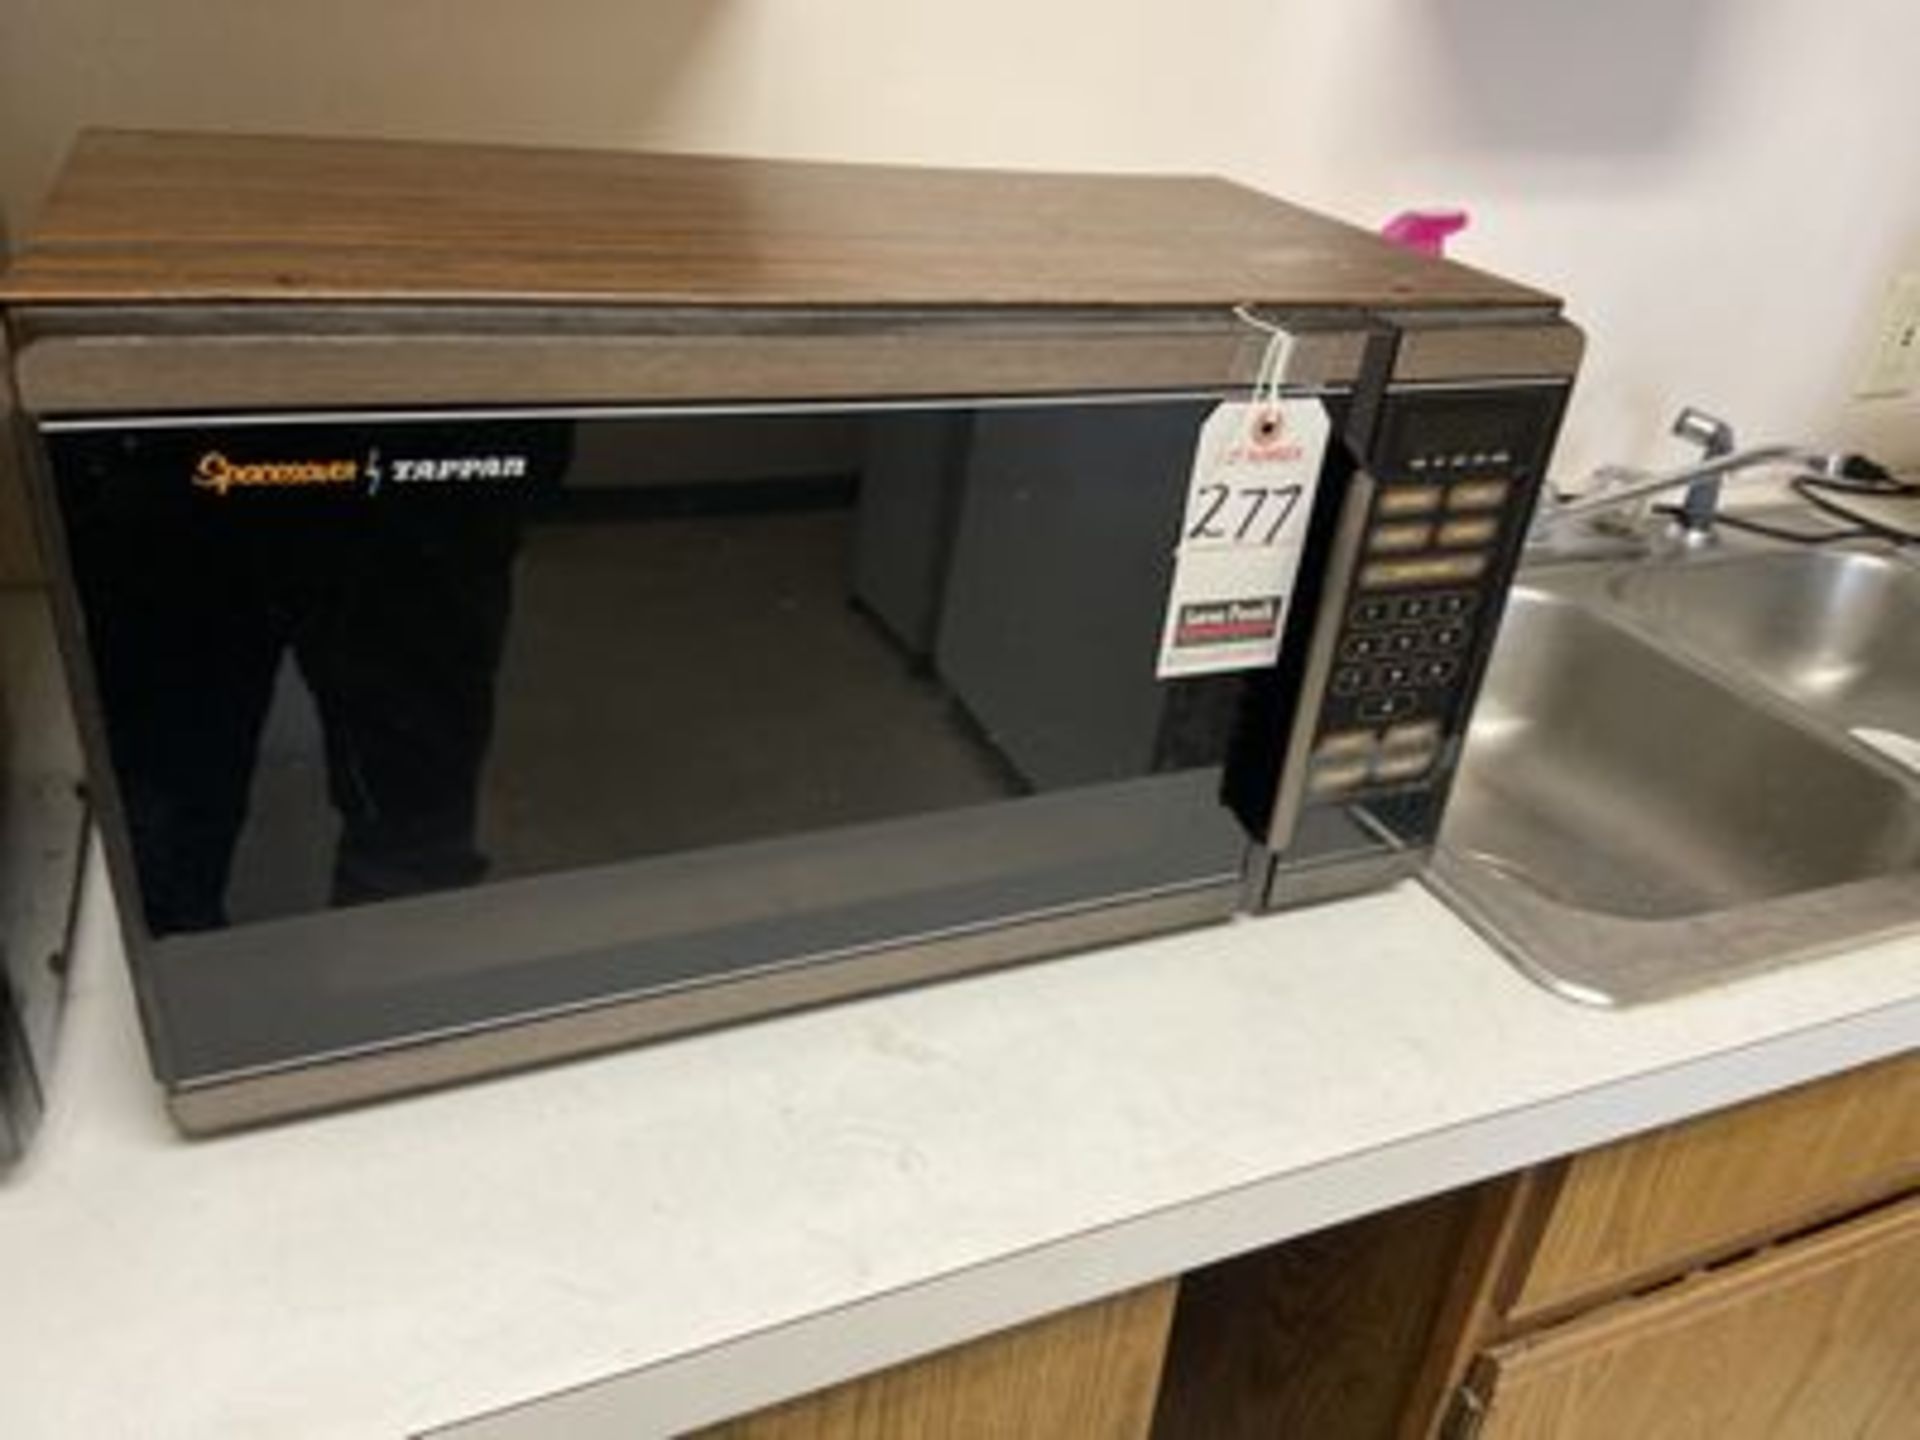 TAPPAN SPACESAVER MICROWAVE OVEN